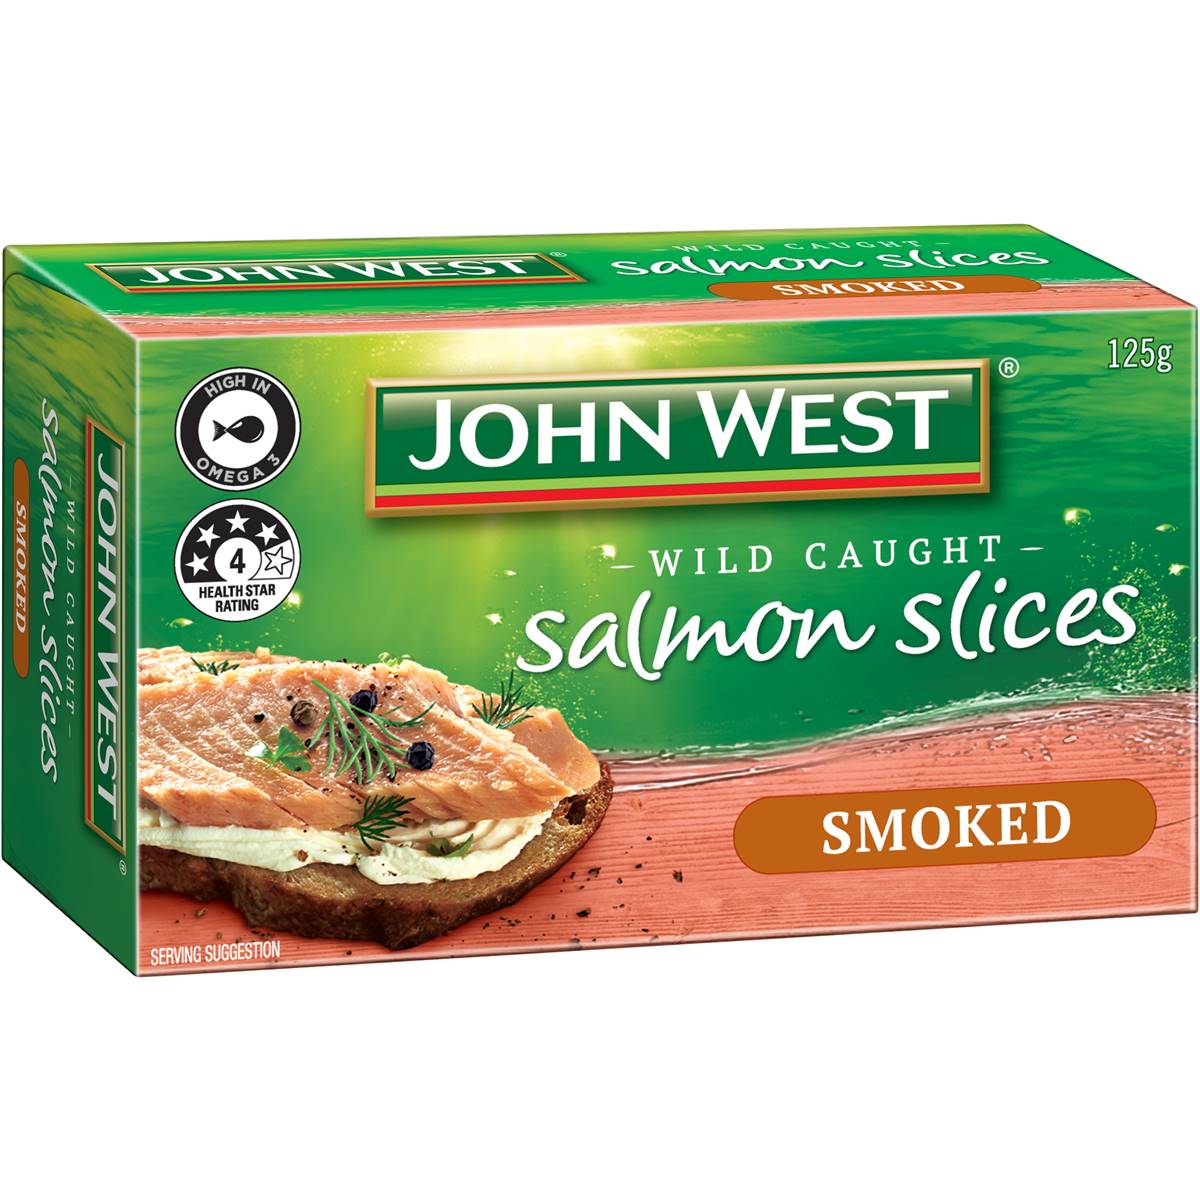 Calories in John West Wild Caught Salmon Slices Naturally Smoked